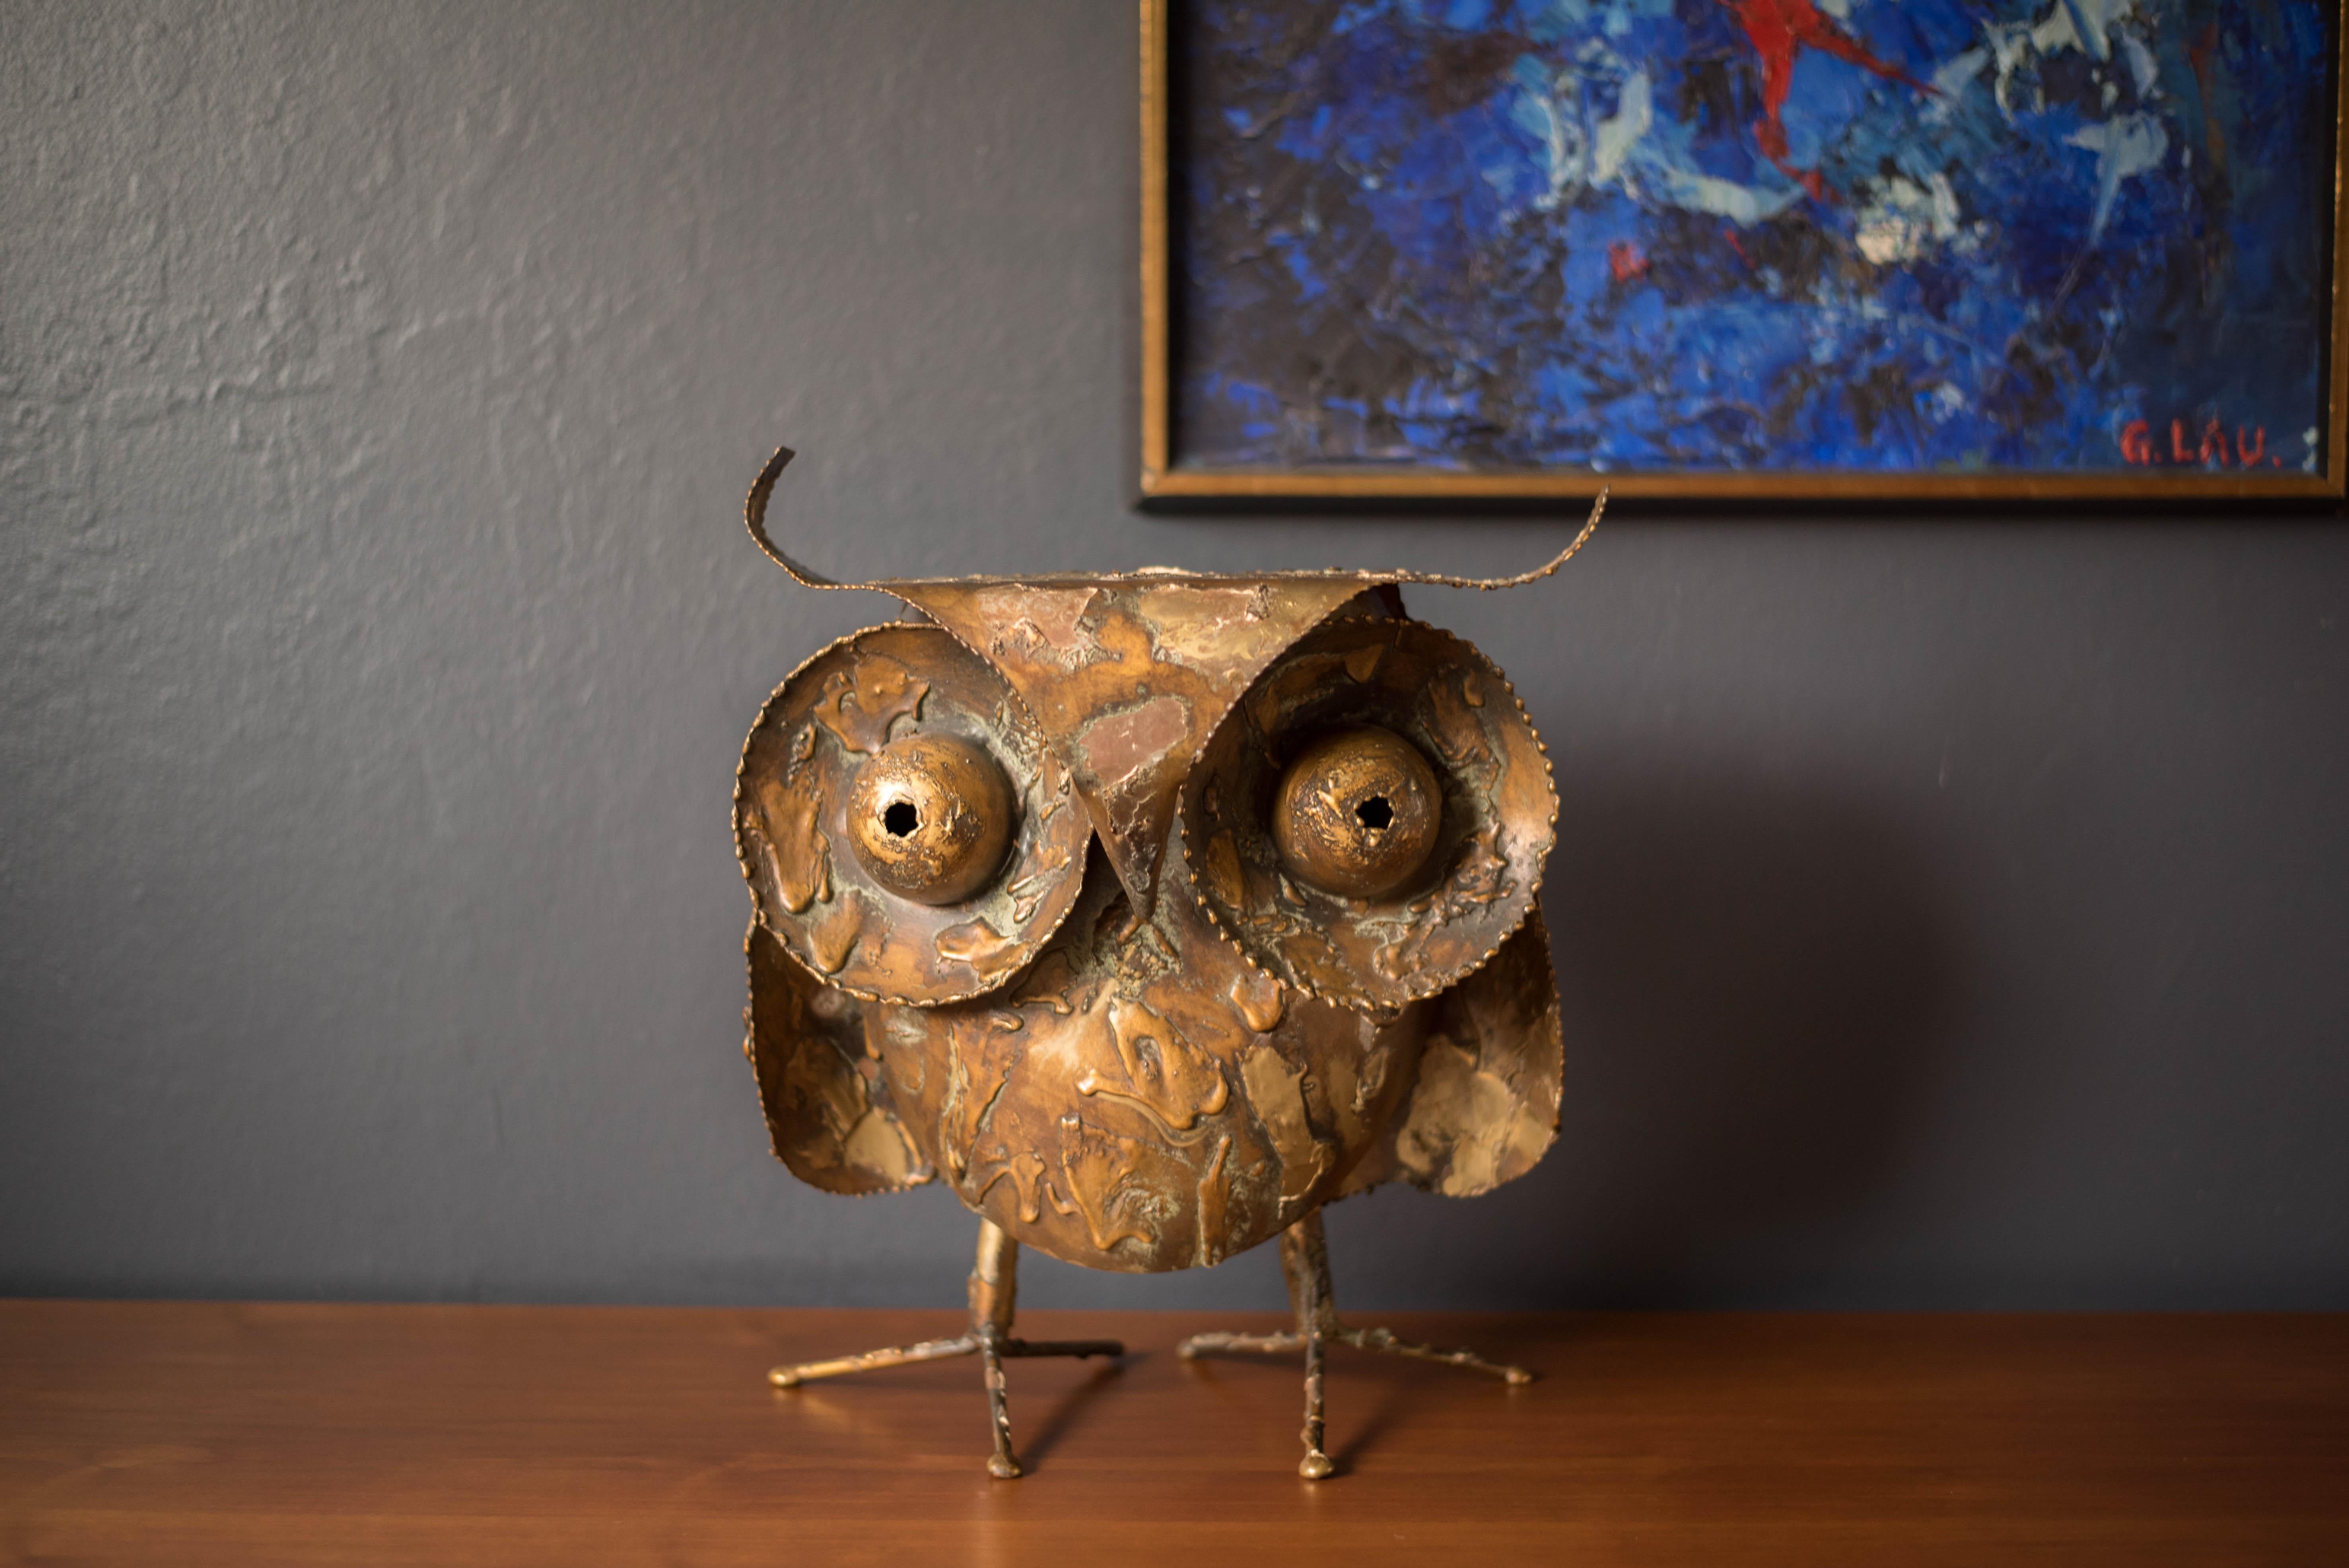 Vintage original large abstract metal owl sculpture designed by Curtis Jere for Artisan House signed '69. This playful art piece will light up any room featuring dramatic oversized eyes and feet. The sculpture displays plenty of patina and vintage